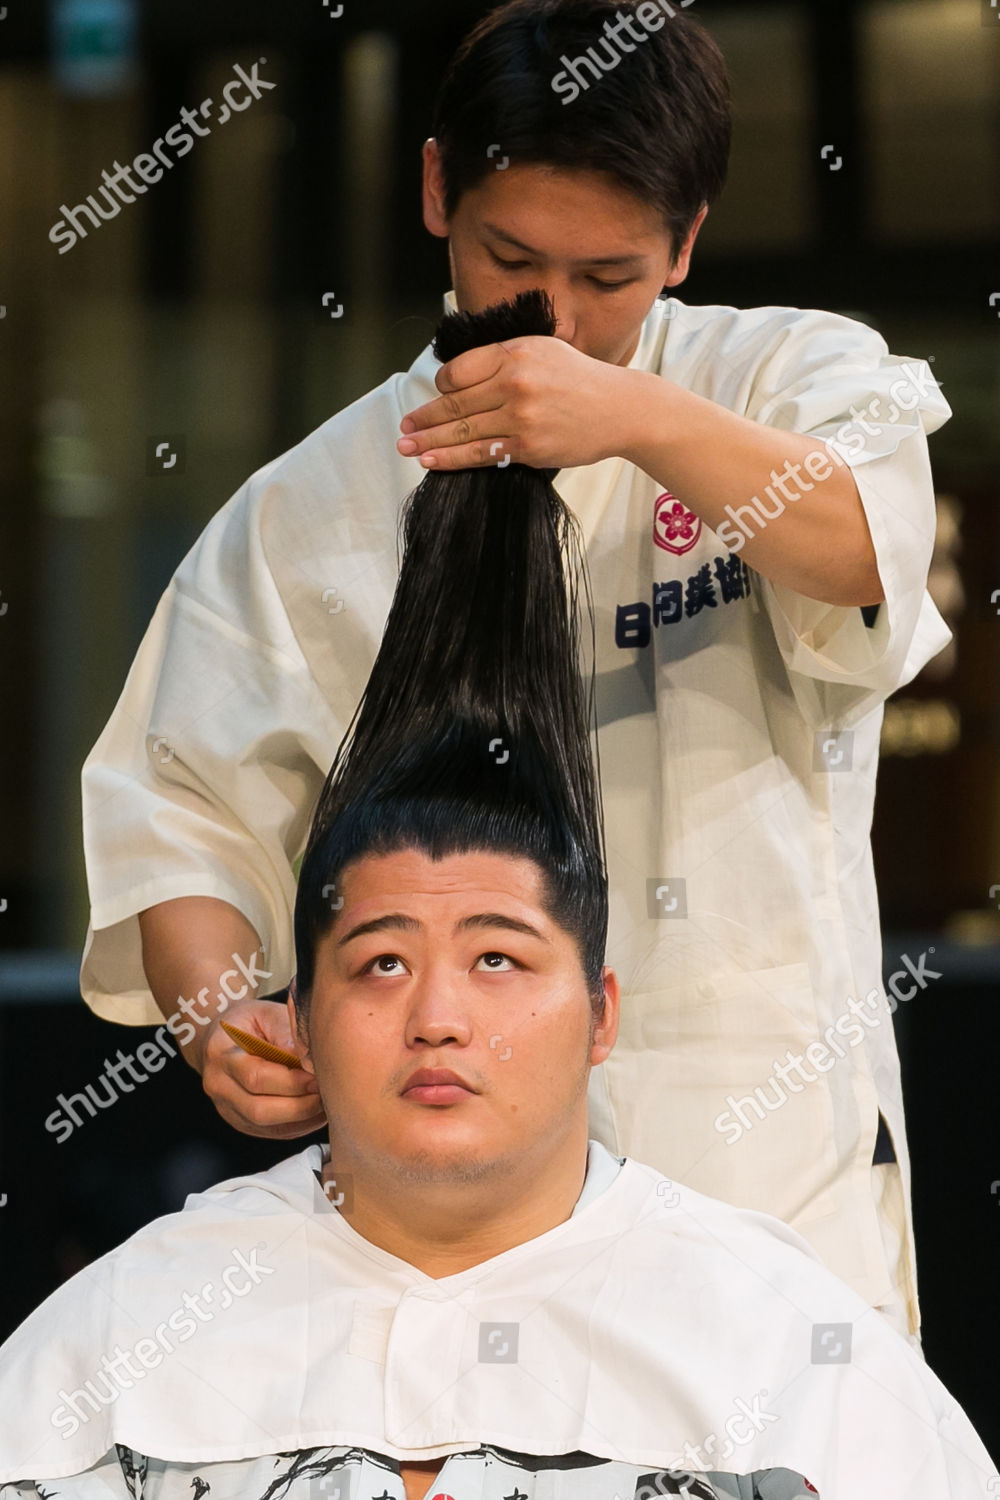 Coiffeur Dresses Sumo Wrestlers Hair Editorial Stock Photo - Stock Image |  Shutterstock